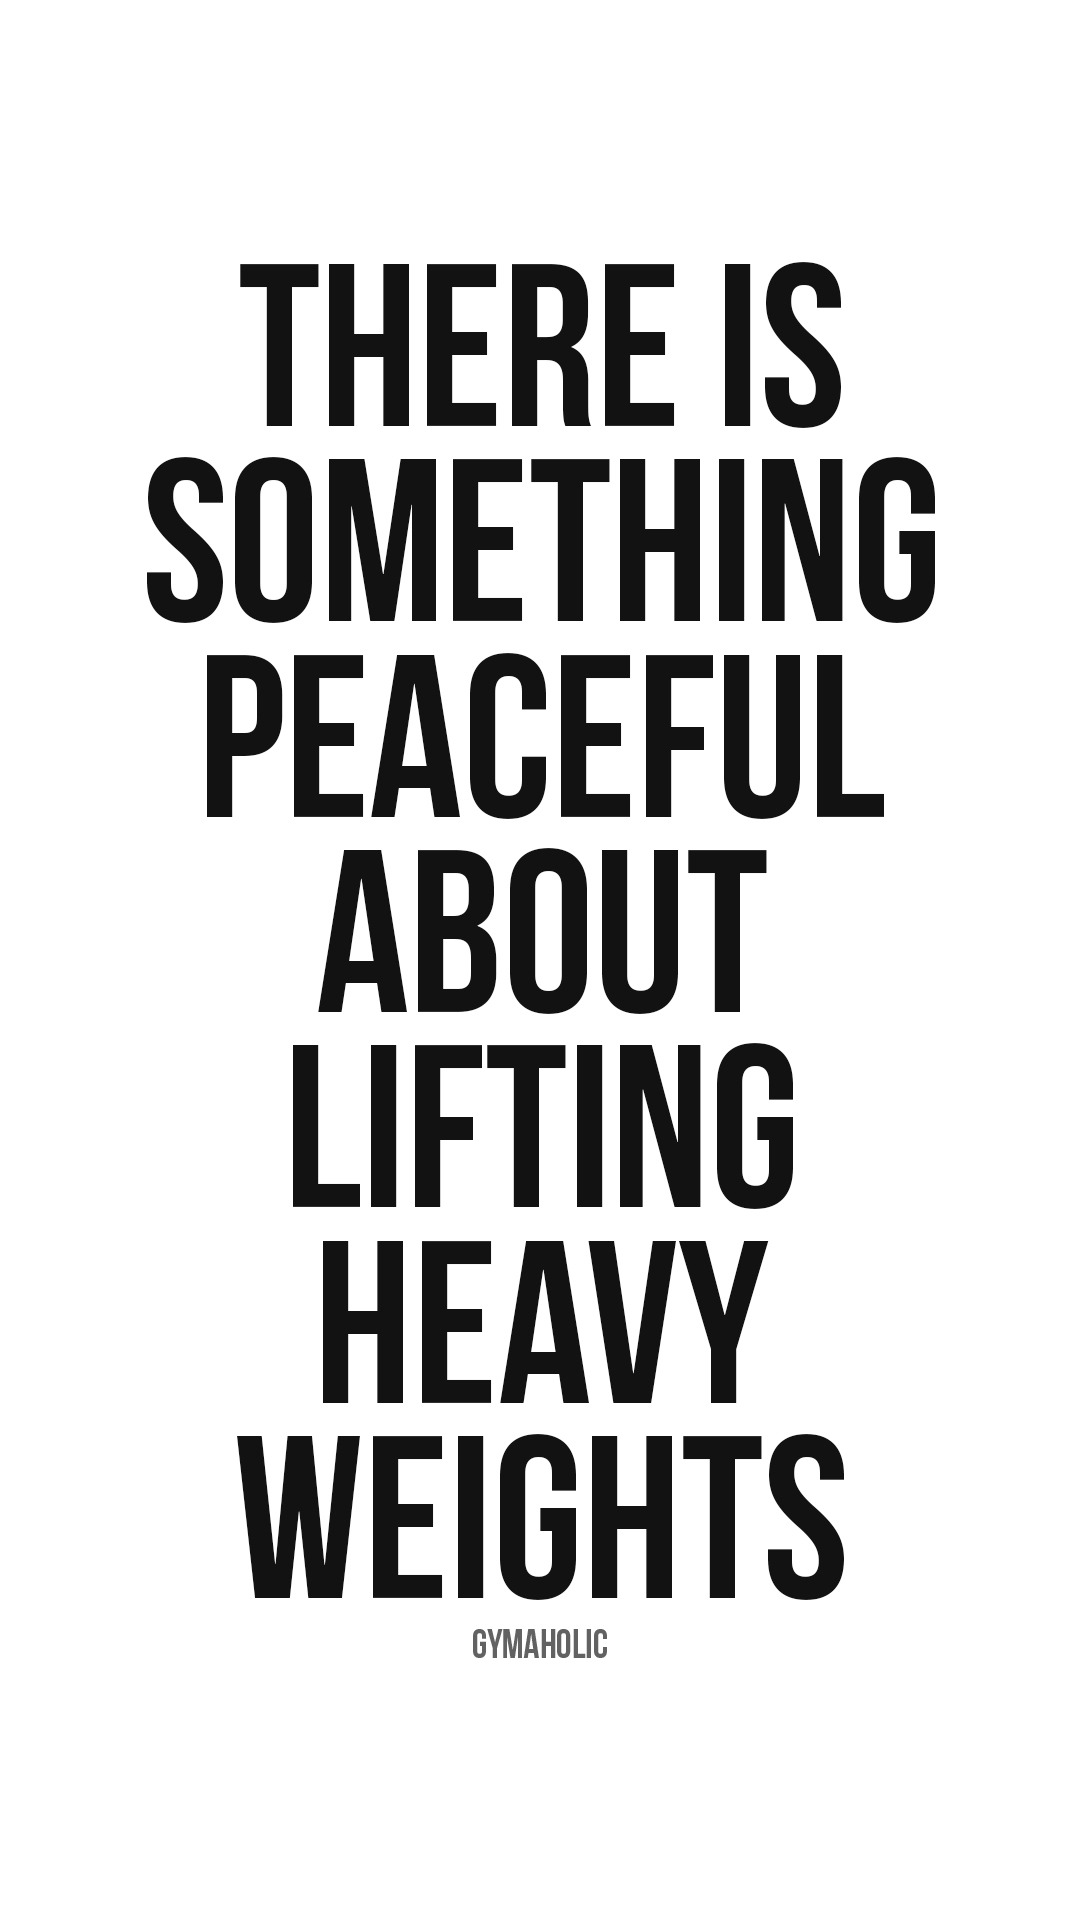 There is something peaceful about lifting heavy weights